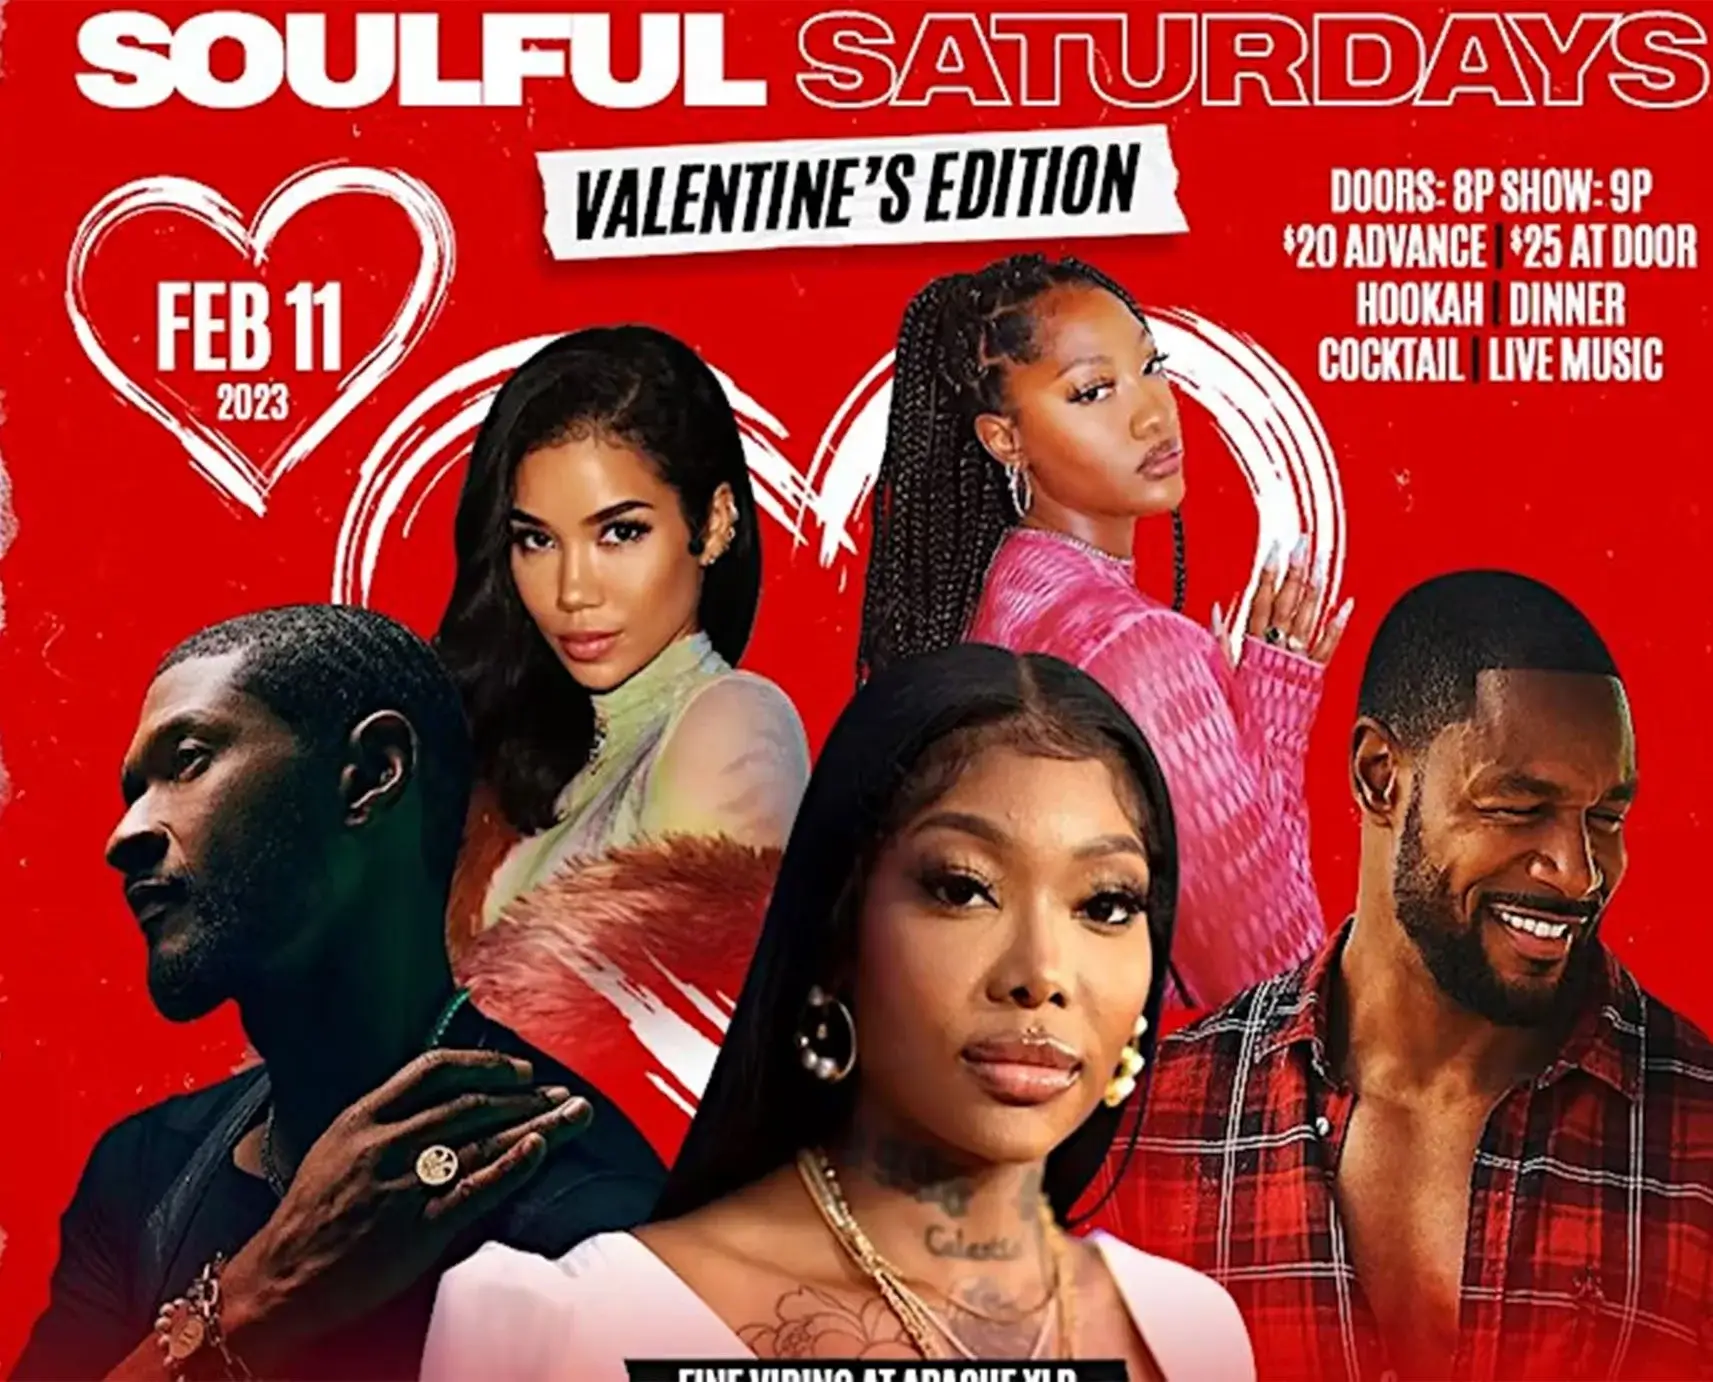 Dinner & A Date: Soulful Saturdays 'Valentines Edition